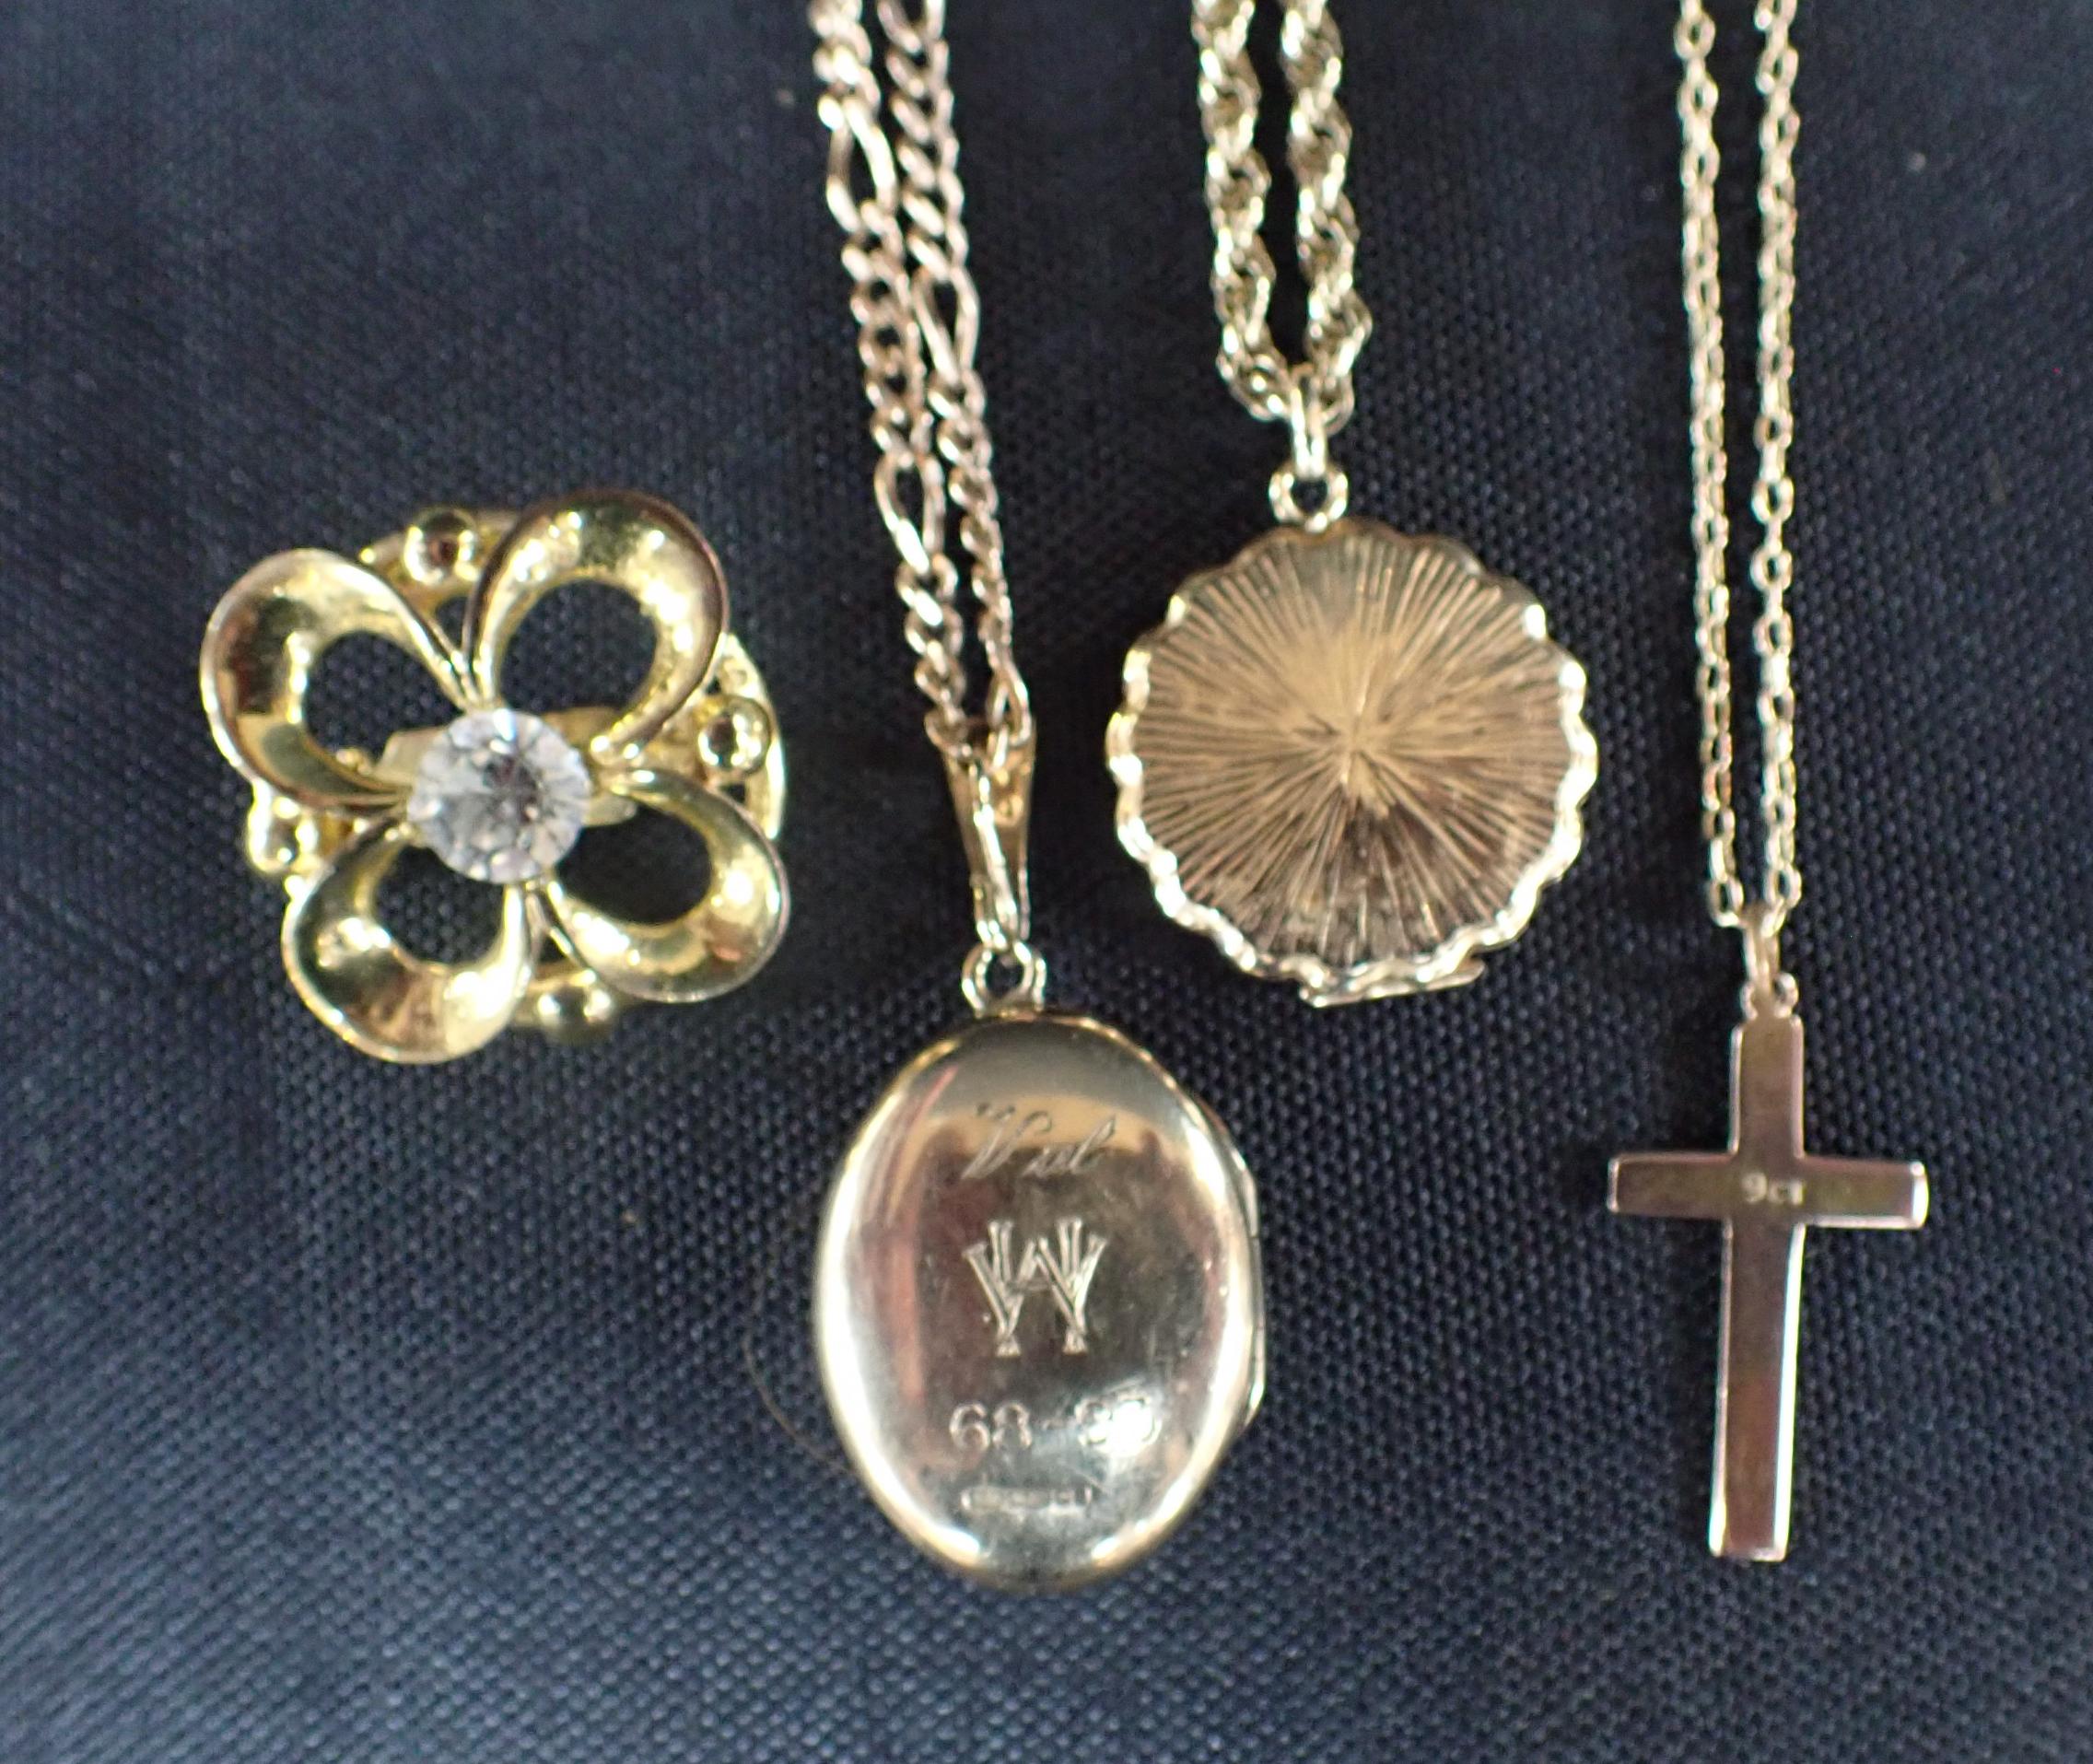 TWO 9CT GOLD LOCKETS AND CHAINS - Image 2 of 2